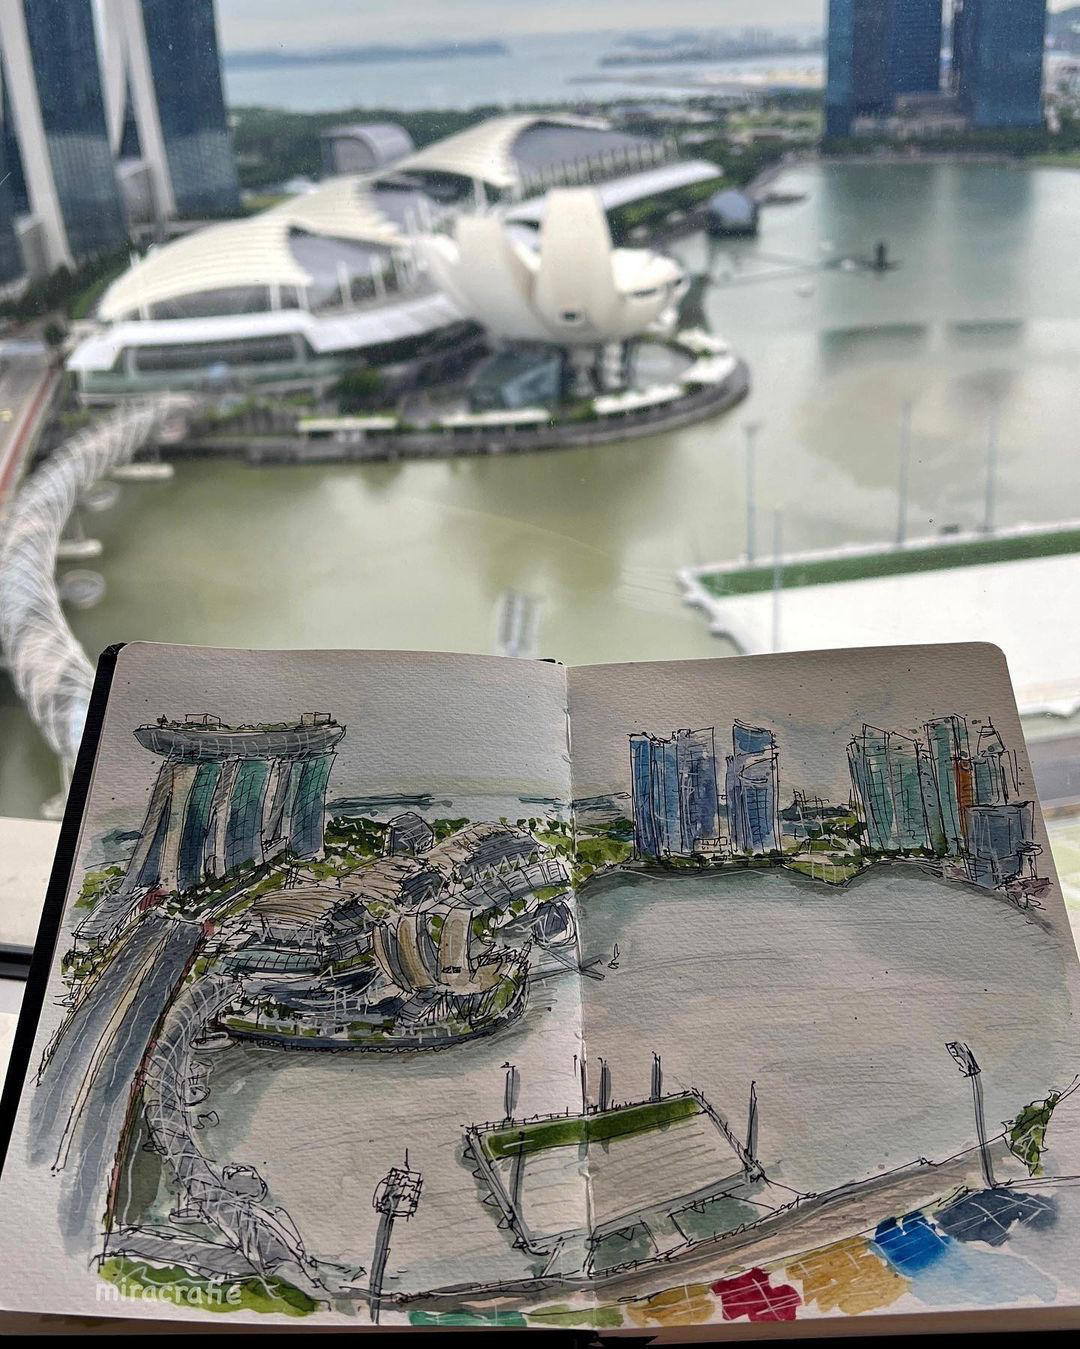 The perfect vantage point to be inspired by the Singapore skyline